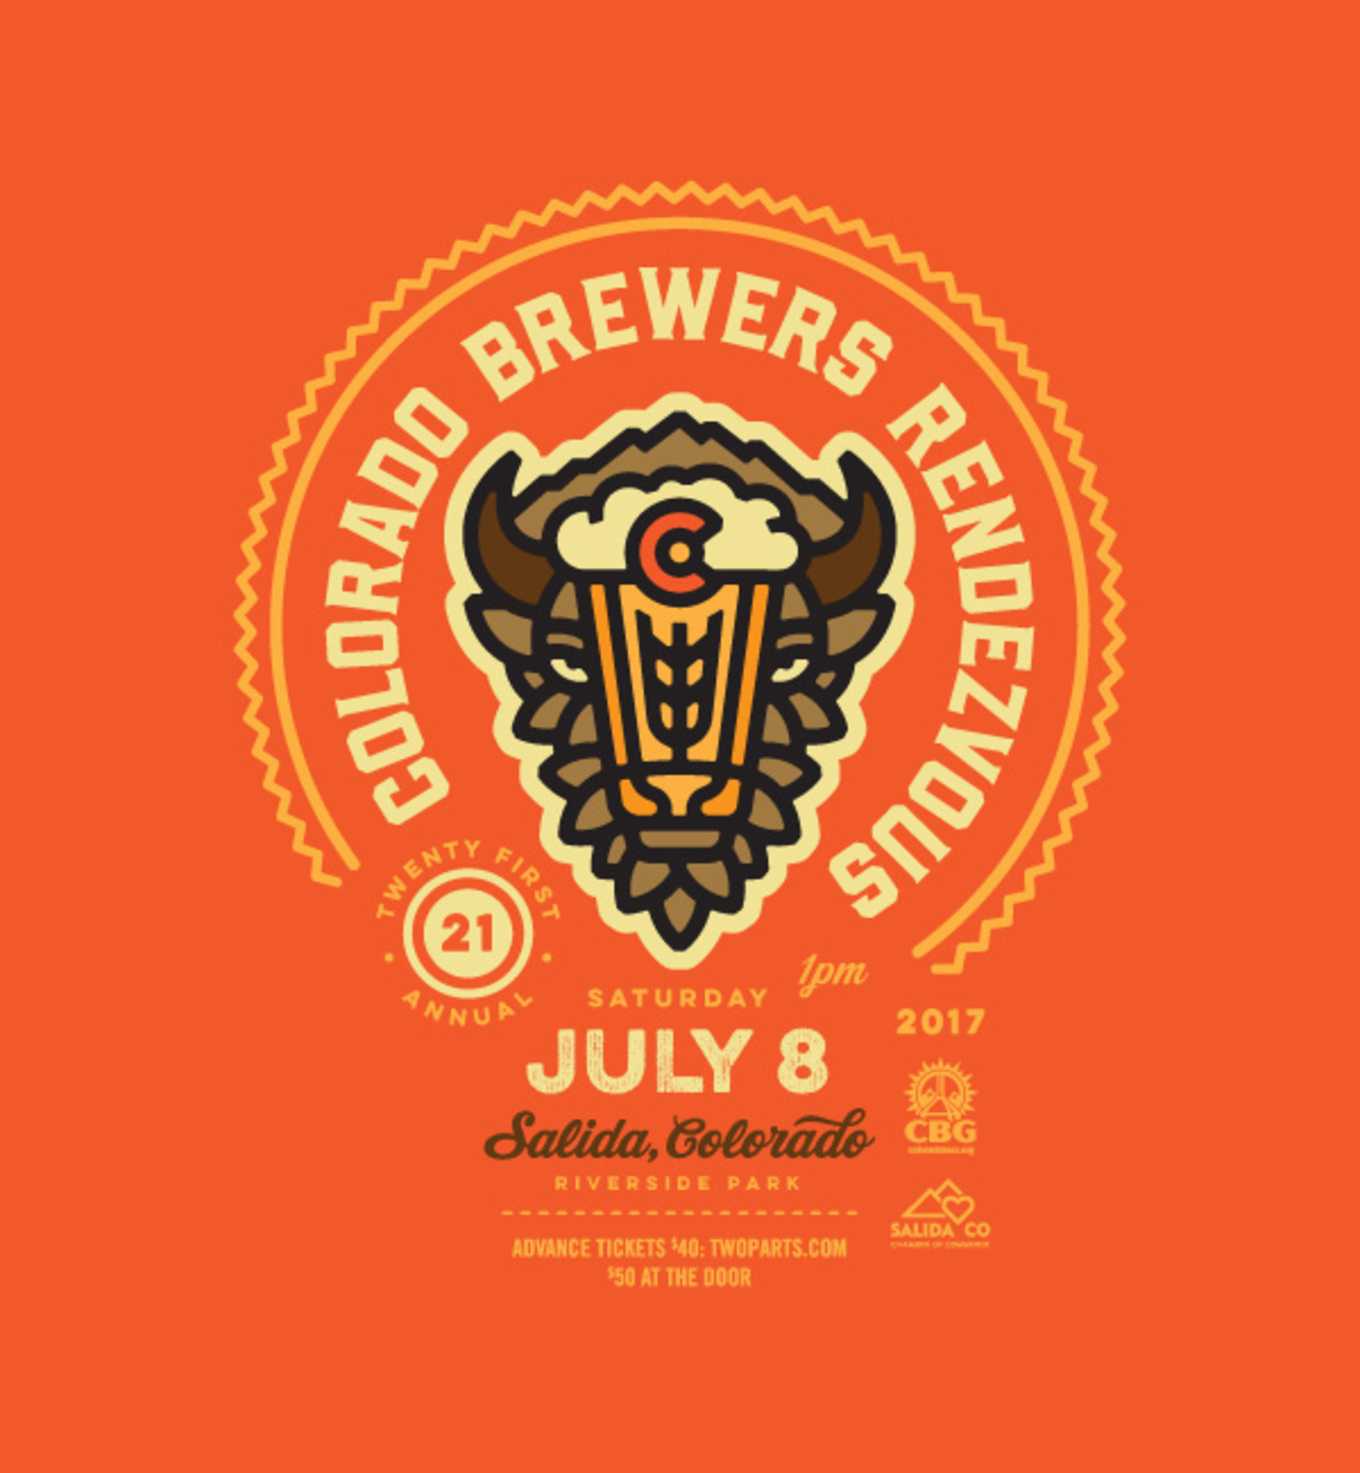 21st Annual Colorado Brewers Rendezvous